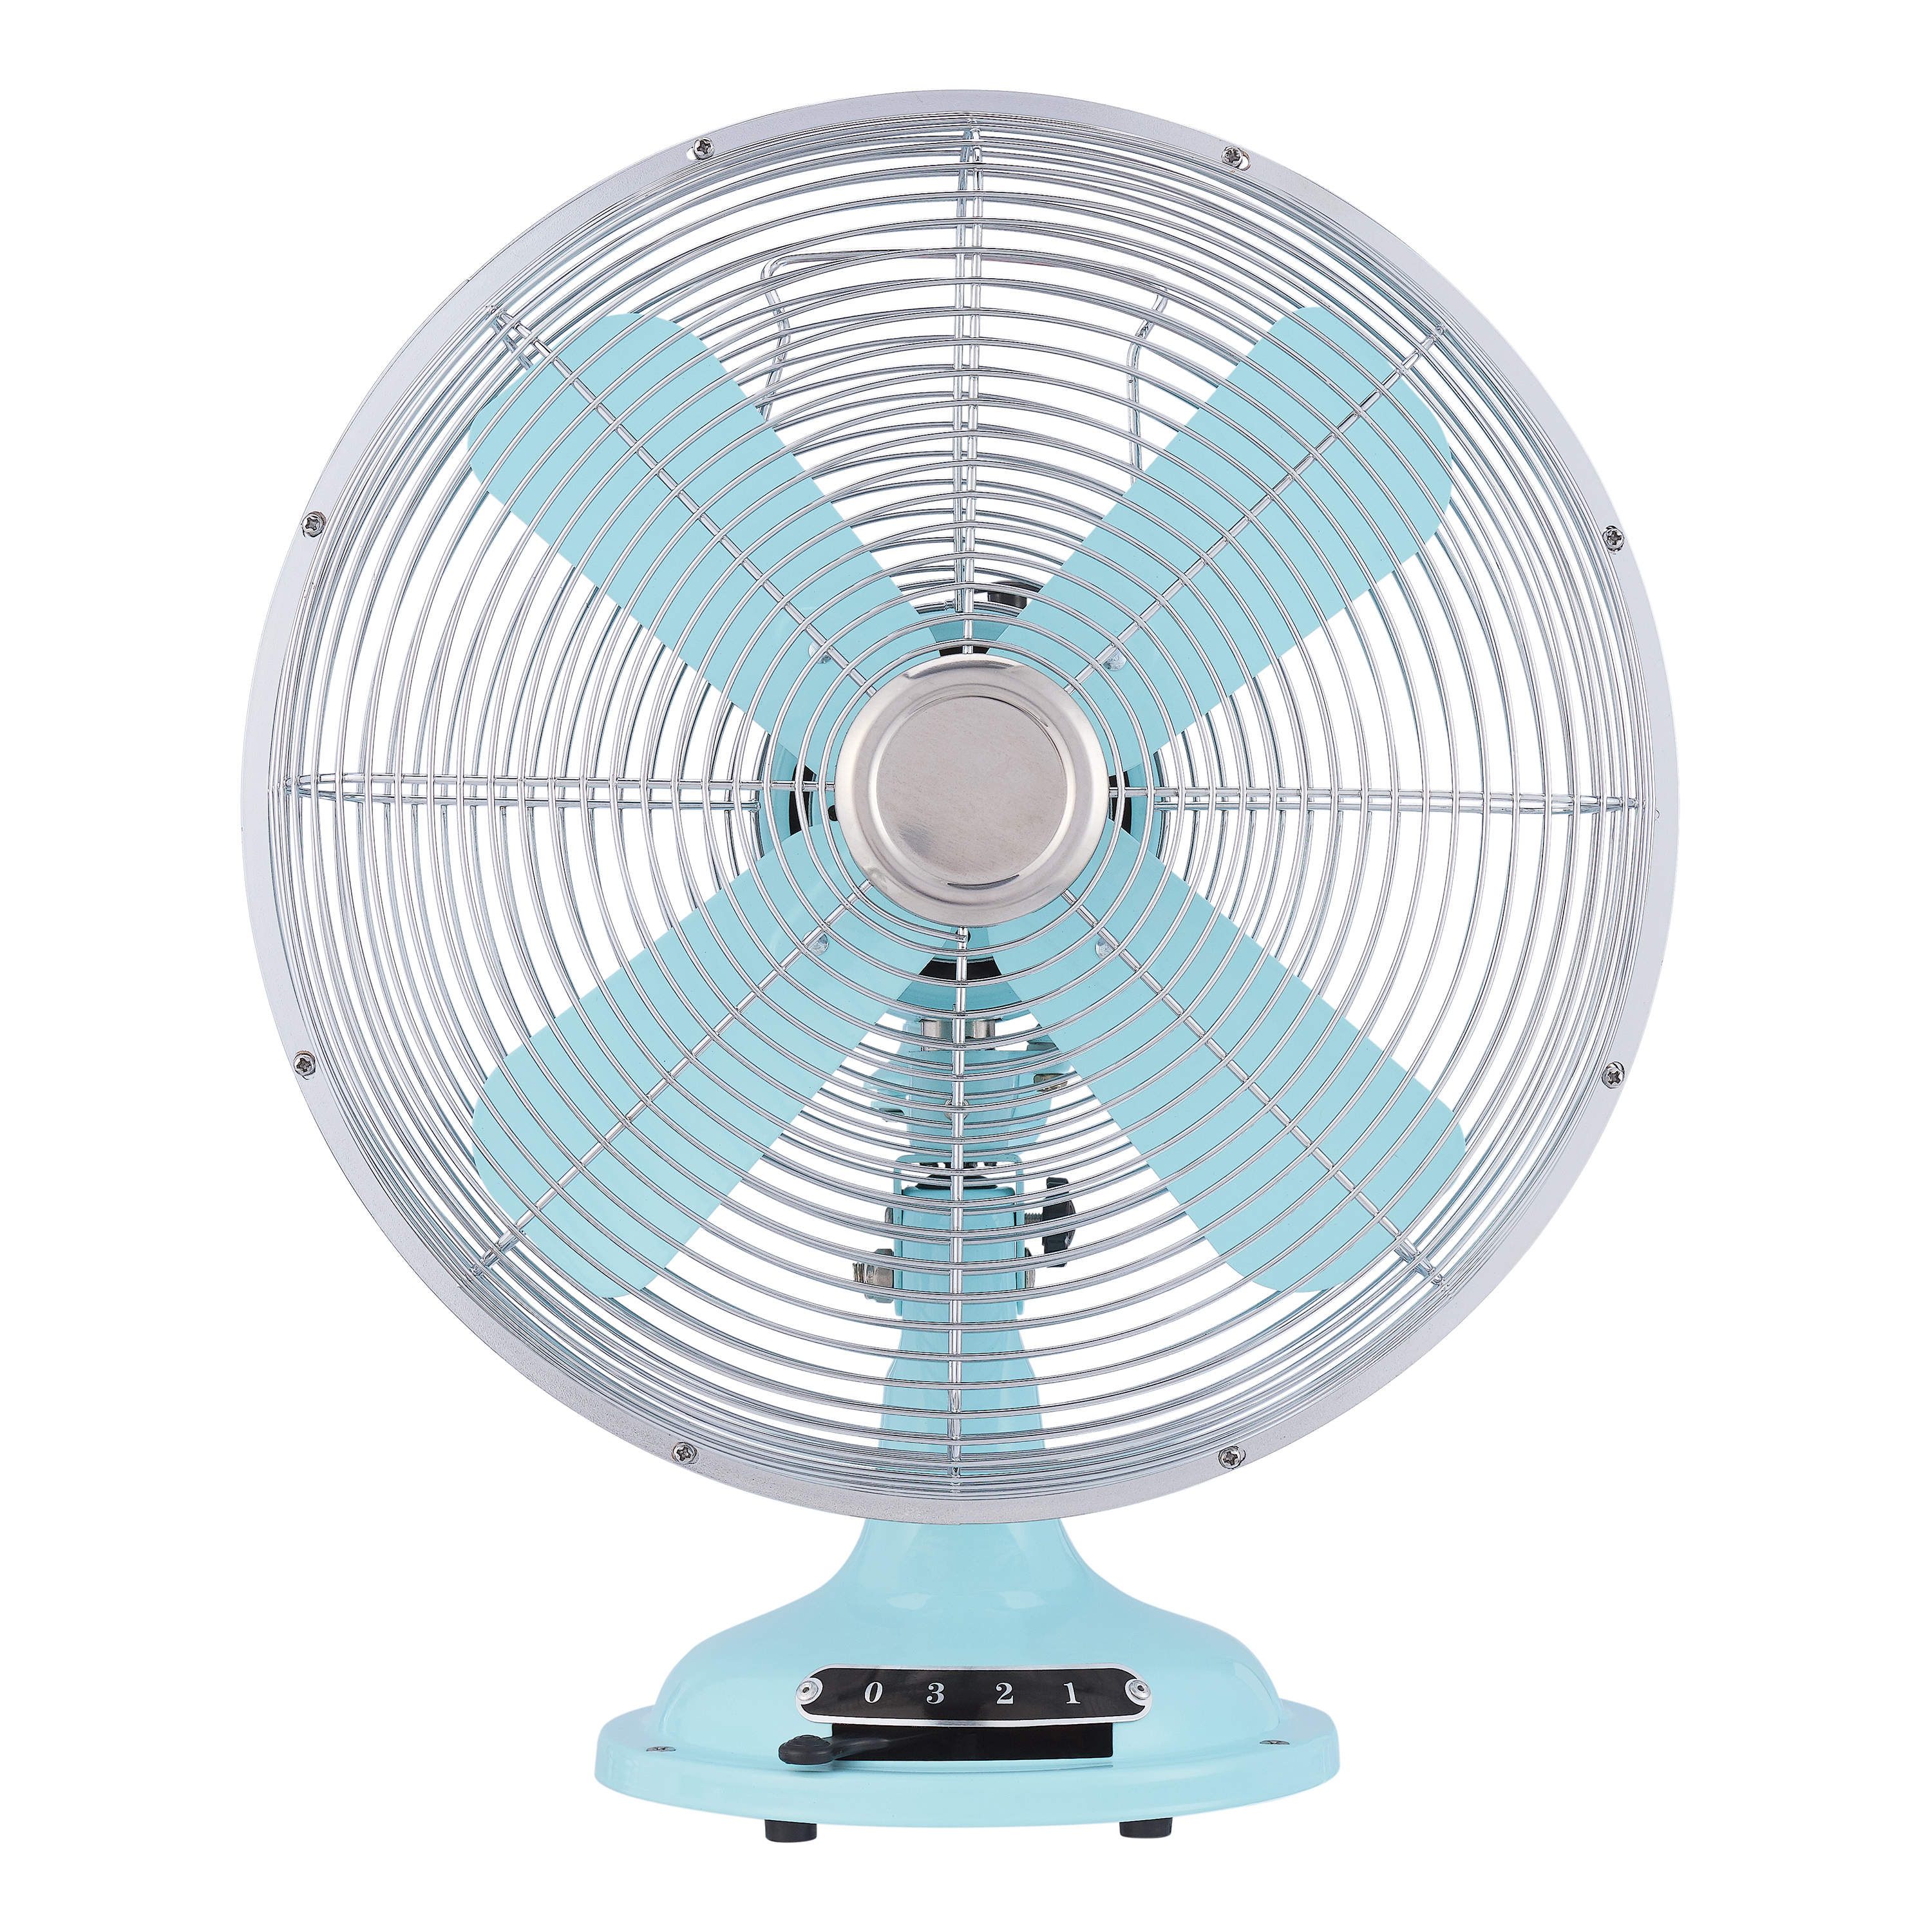 Better Homes & Gardens New 12 inch Retro 3-Speed Metal Tilted-Head Oscillation Table Fan Mint - image 1 of 8